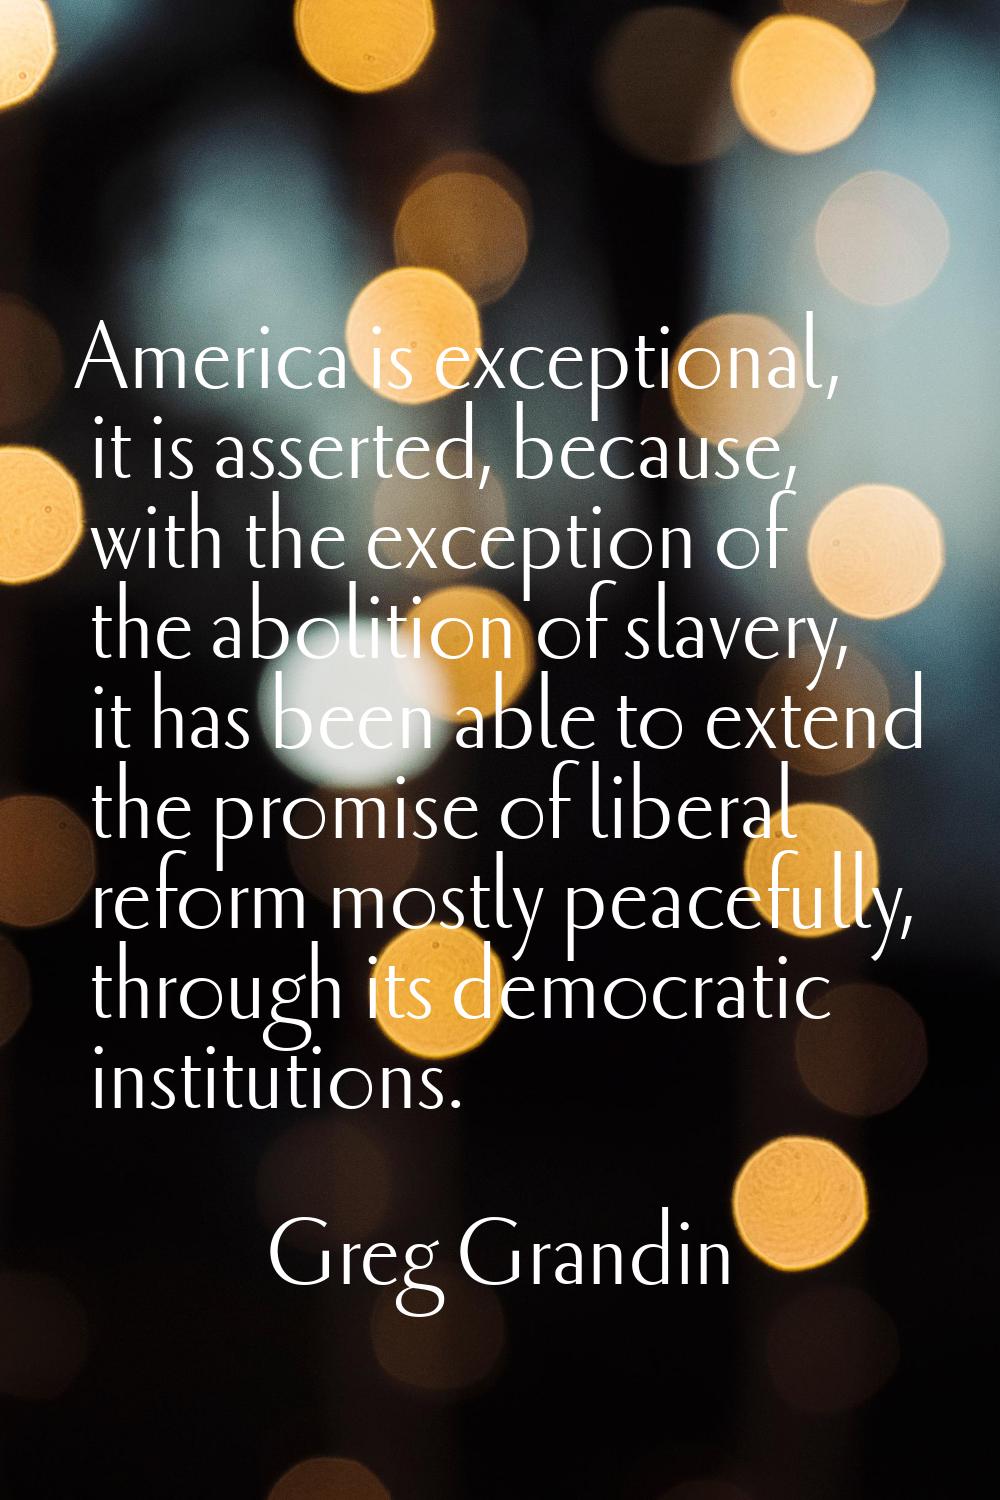 America is exceptional, it is asserted, because, with the exception of the abolition of slavery, it